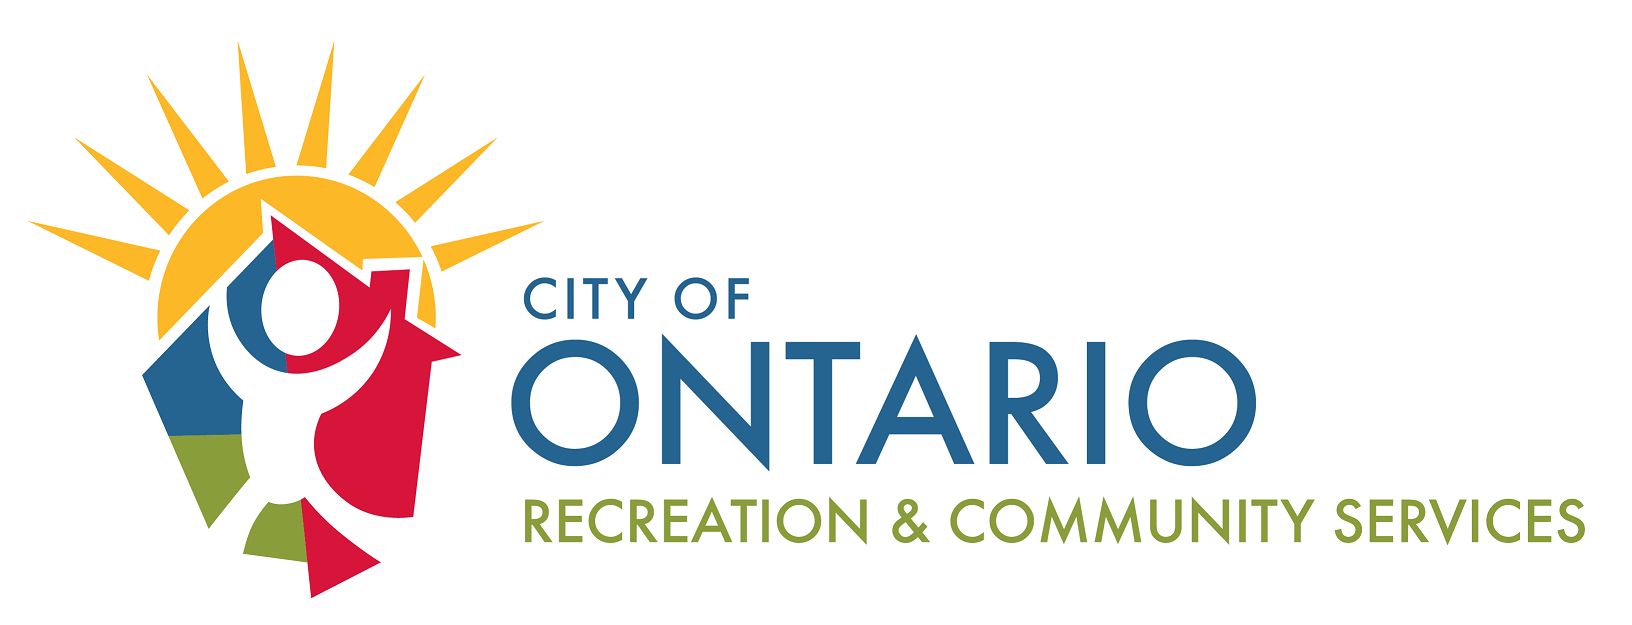 City of Ontario
Recreation and Community Services 
